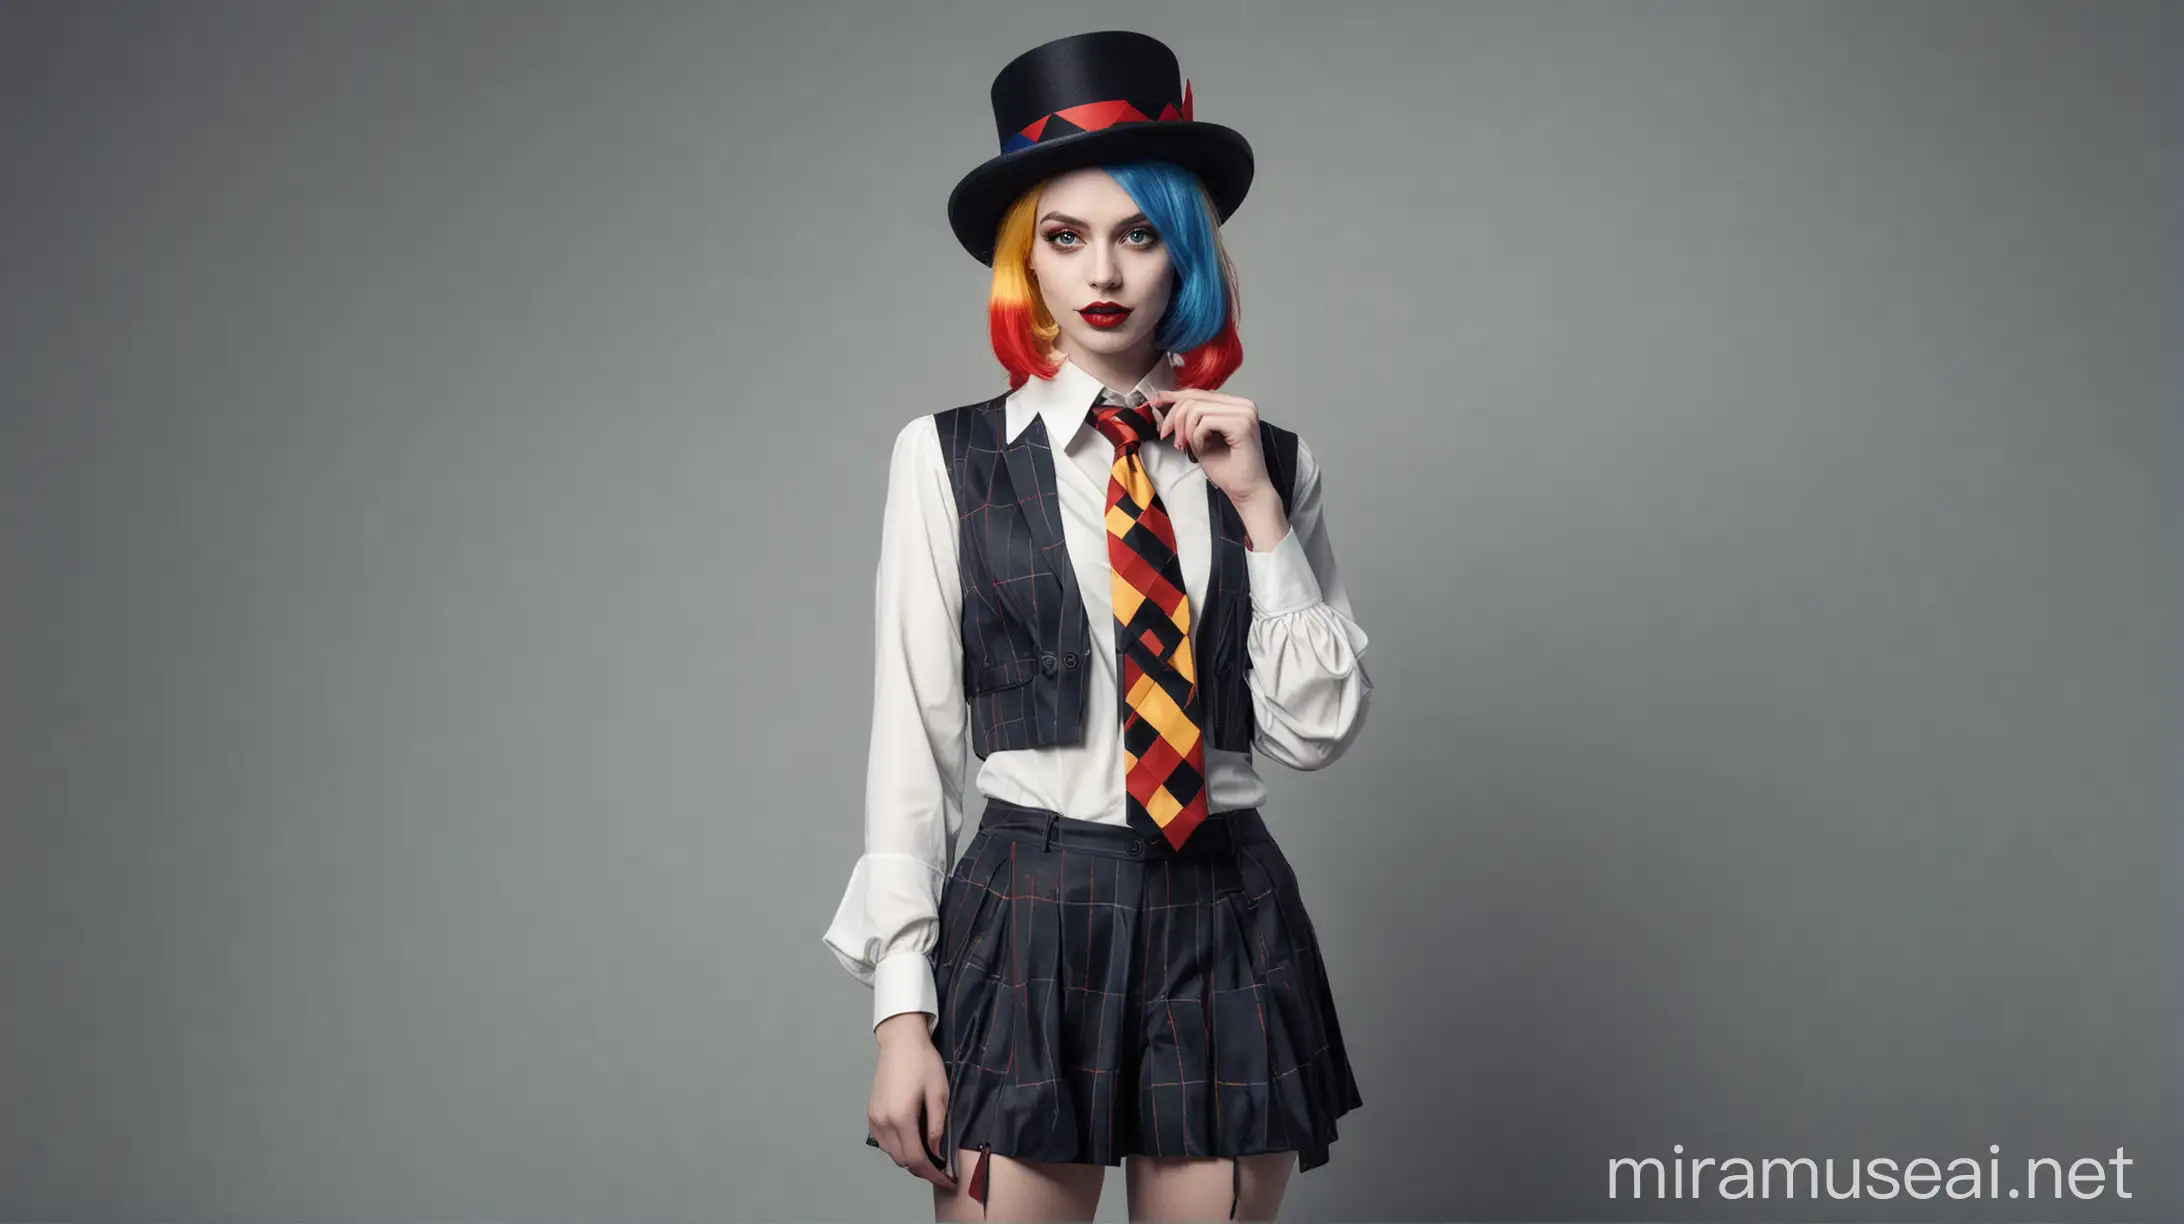 
Phographic harley quinn style bauhaus artistic mouvement and serge lutens style appealing young woman allure fashion gothcore uniform tie curveous waist full front no background geometric blue yellow and red runaway hat
